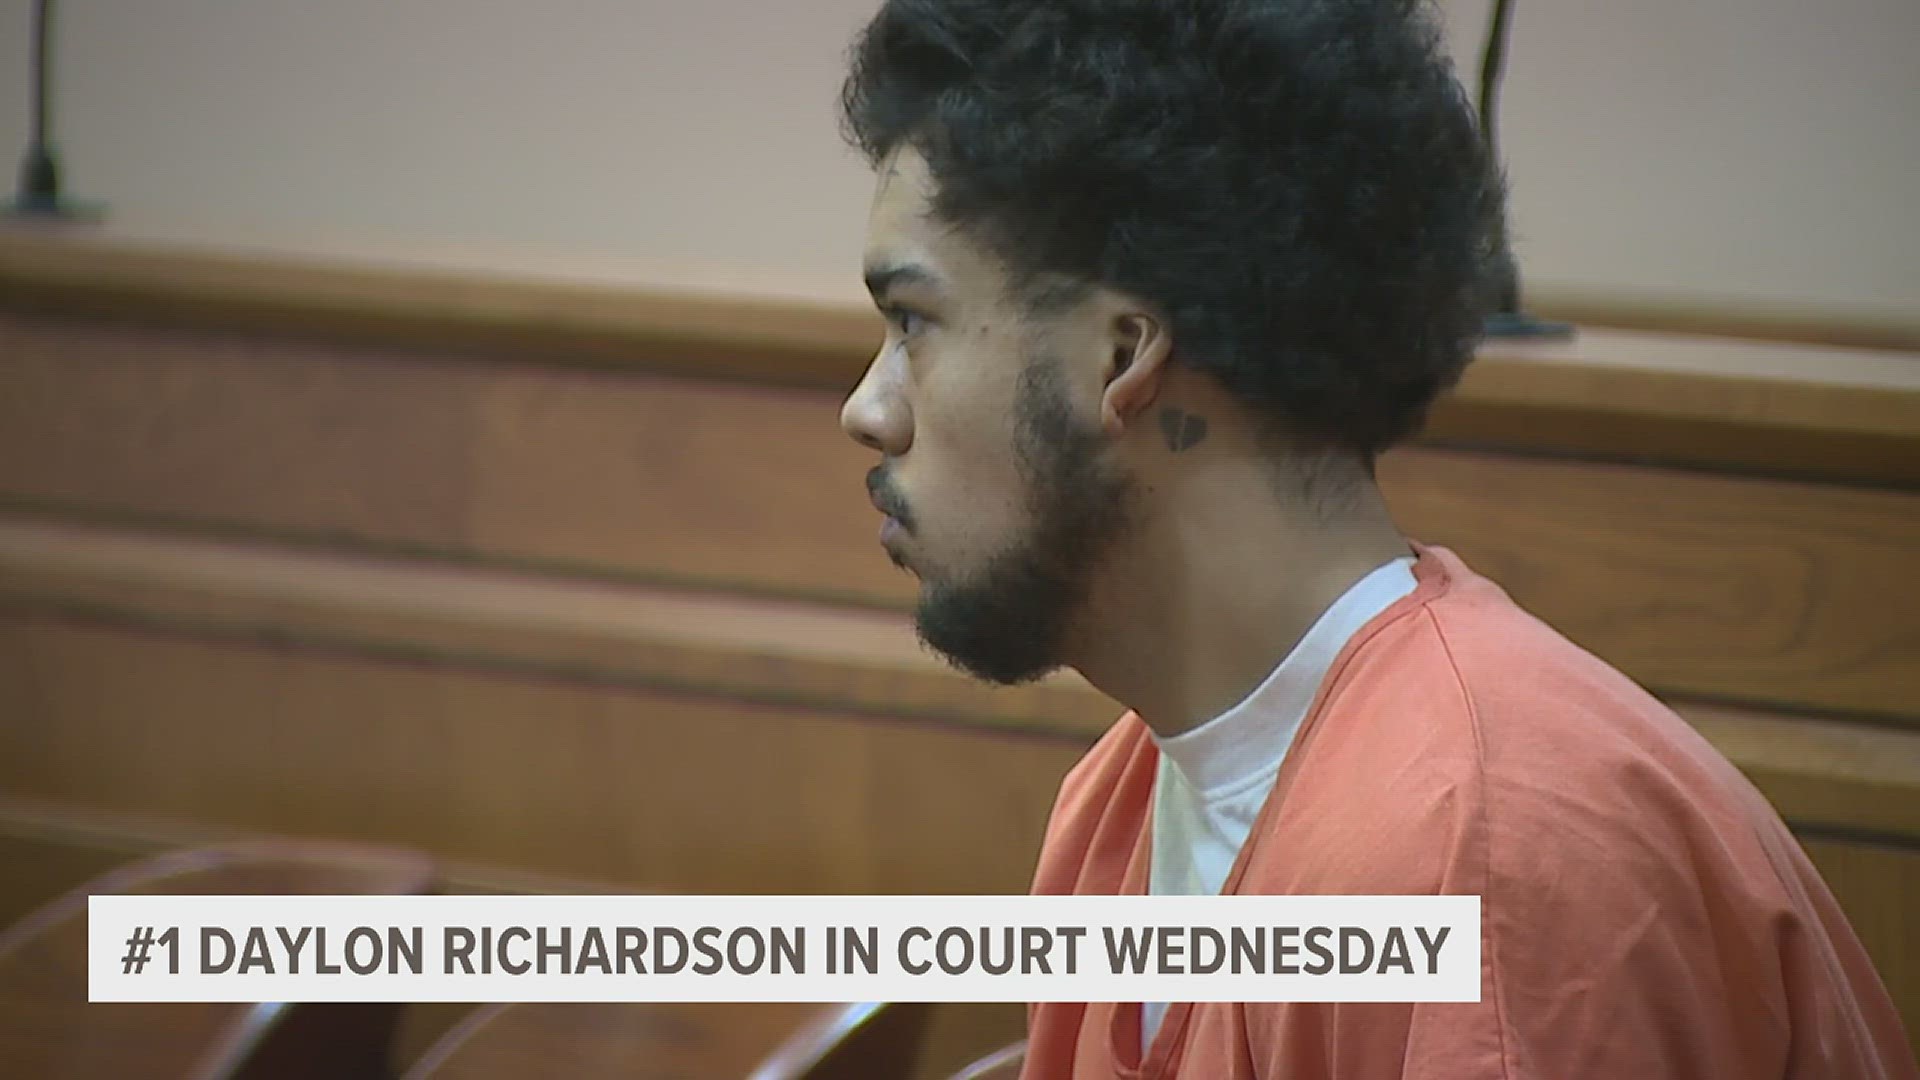 Daylon Richardson is the man accused of a hit and run, killing Knox County deputy Nicholas Weist. The hearing is scheduled for Wednesday.